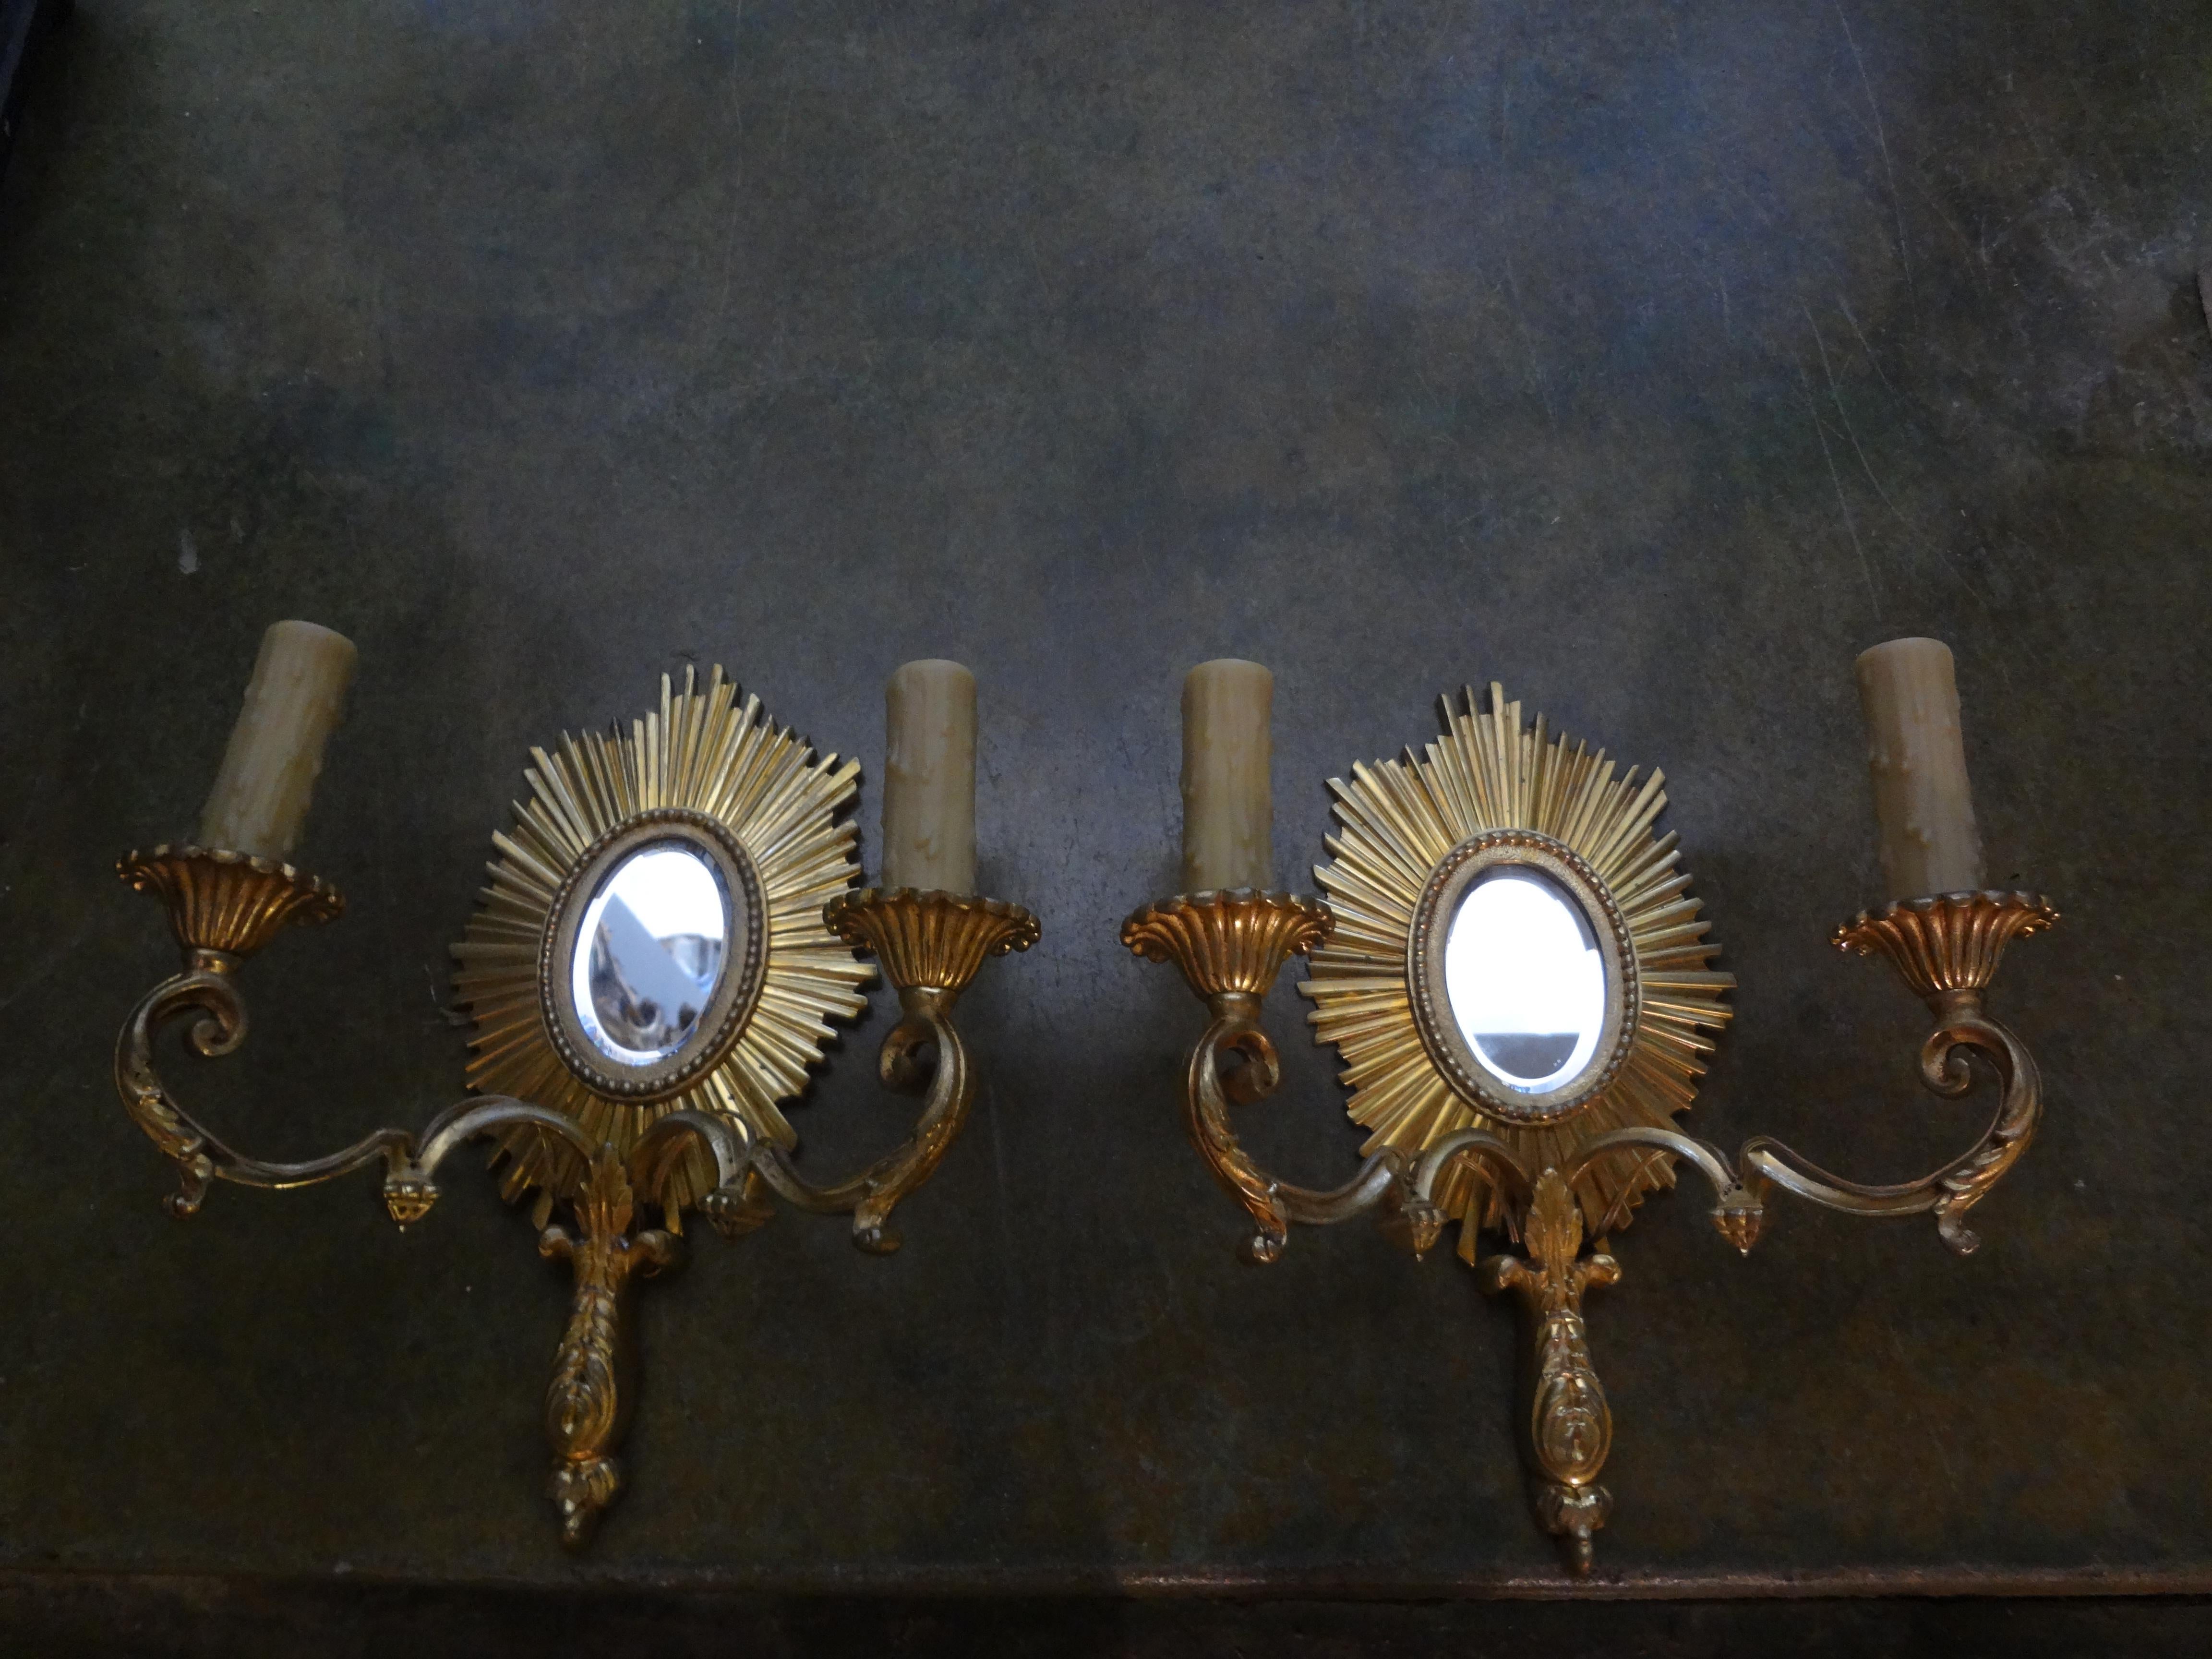 French Maison Baguès attributed gilt bronze sunburst sconces.
Stunning French Maison Bagues attributed gilt bronze 2-light sunburst sconces. These fabulous French Maison Baguès bronze sconces have a beautiful sunburst design with a beveled mirror in